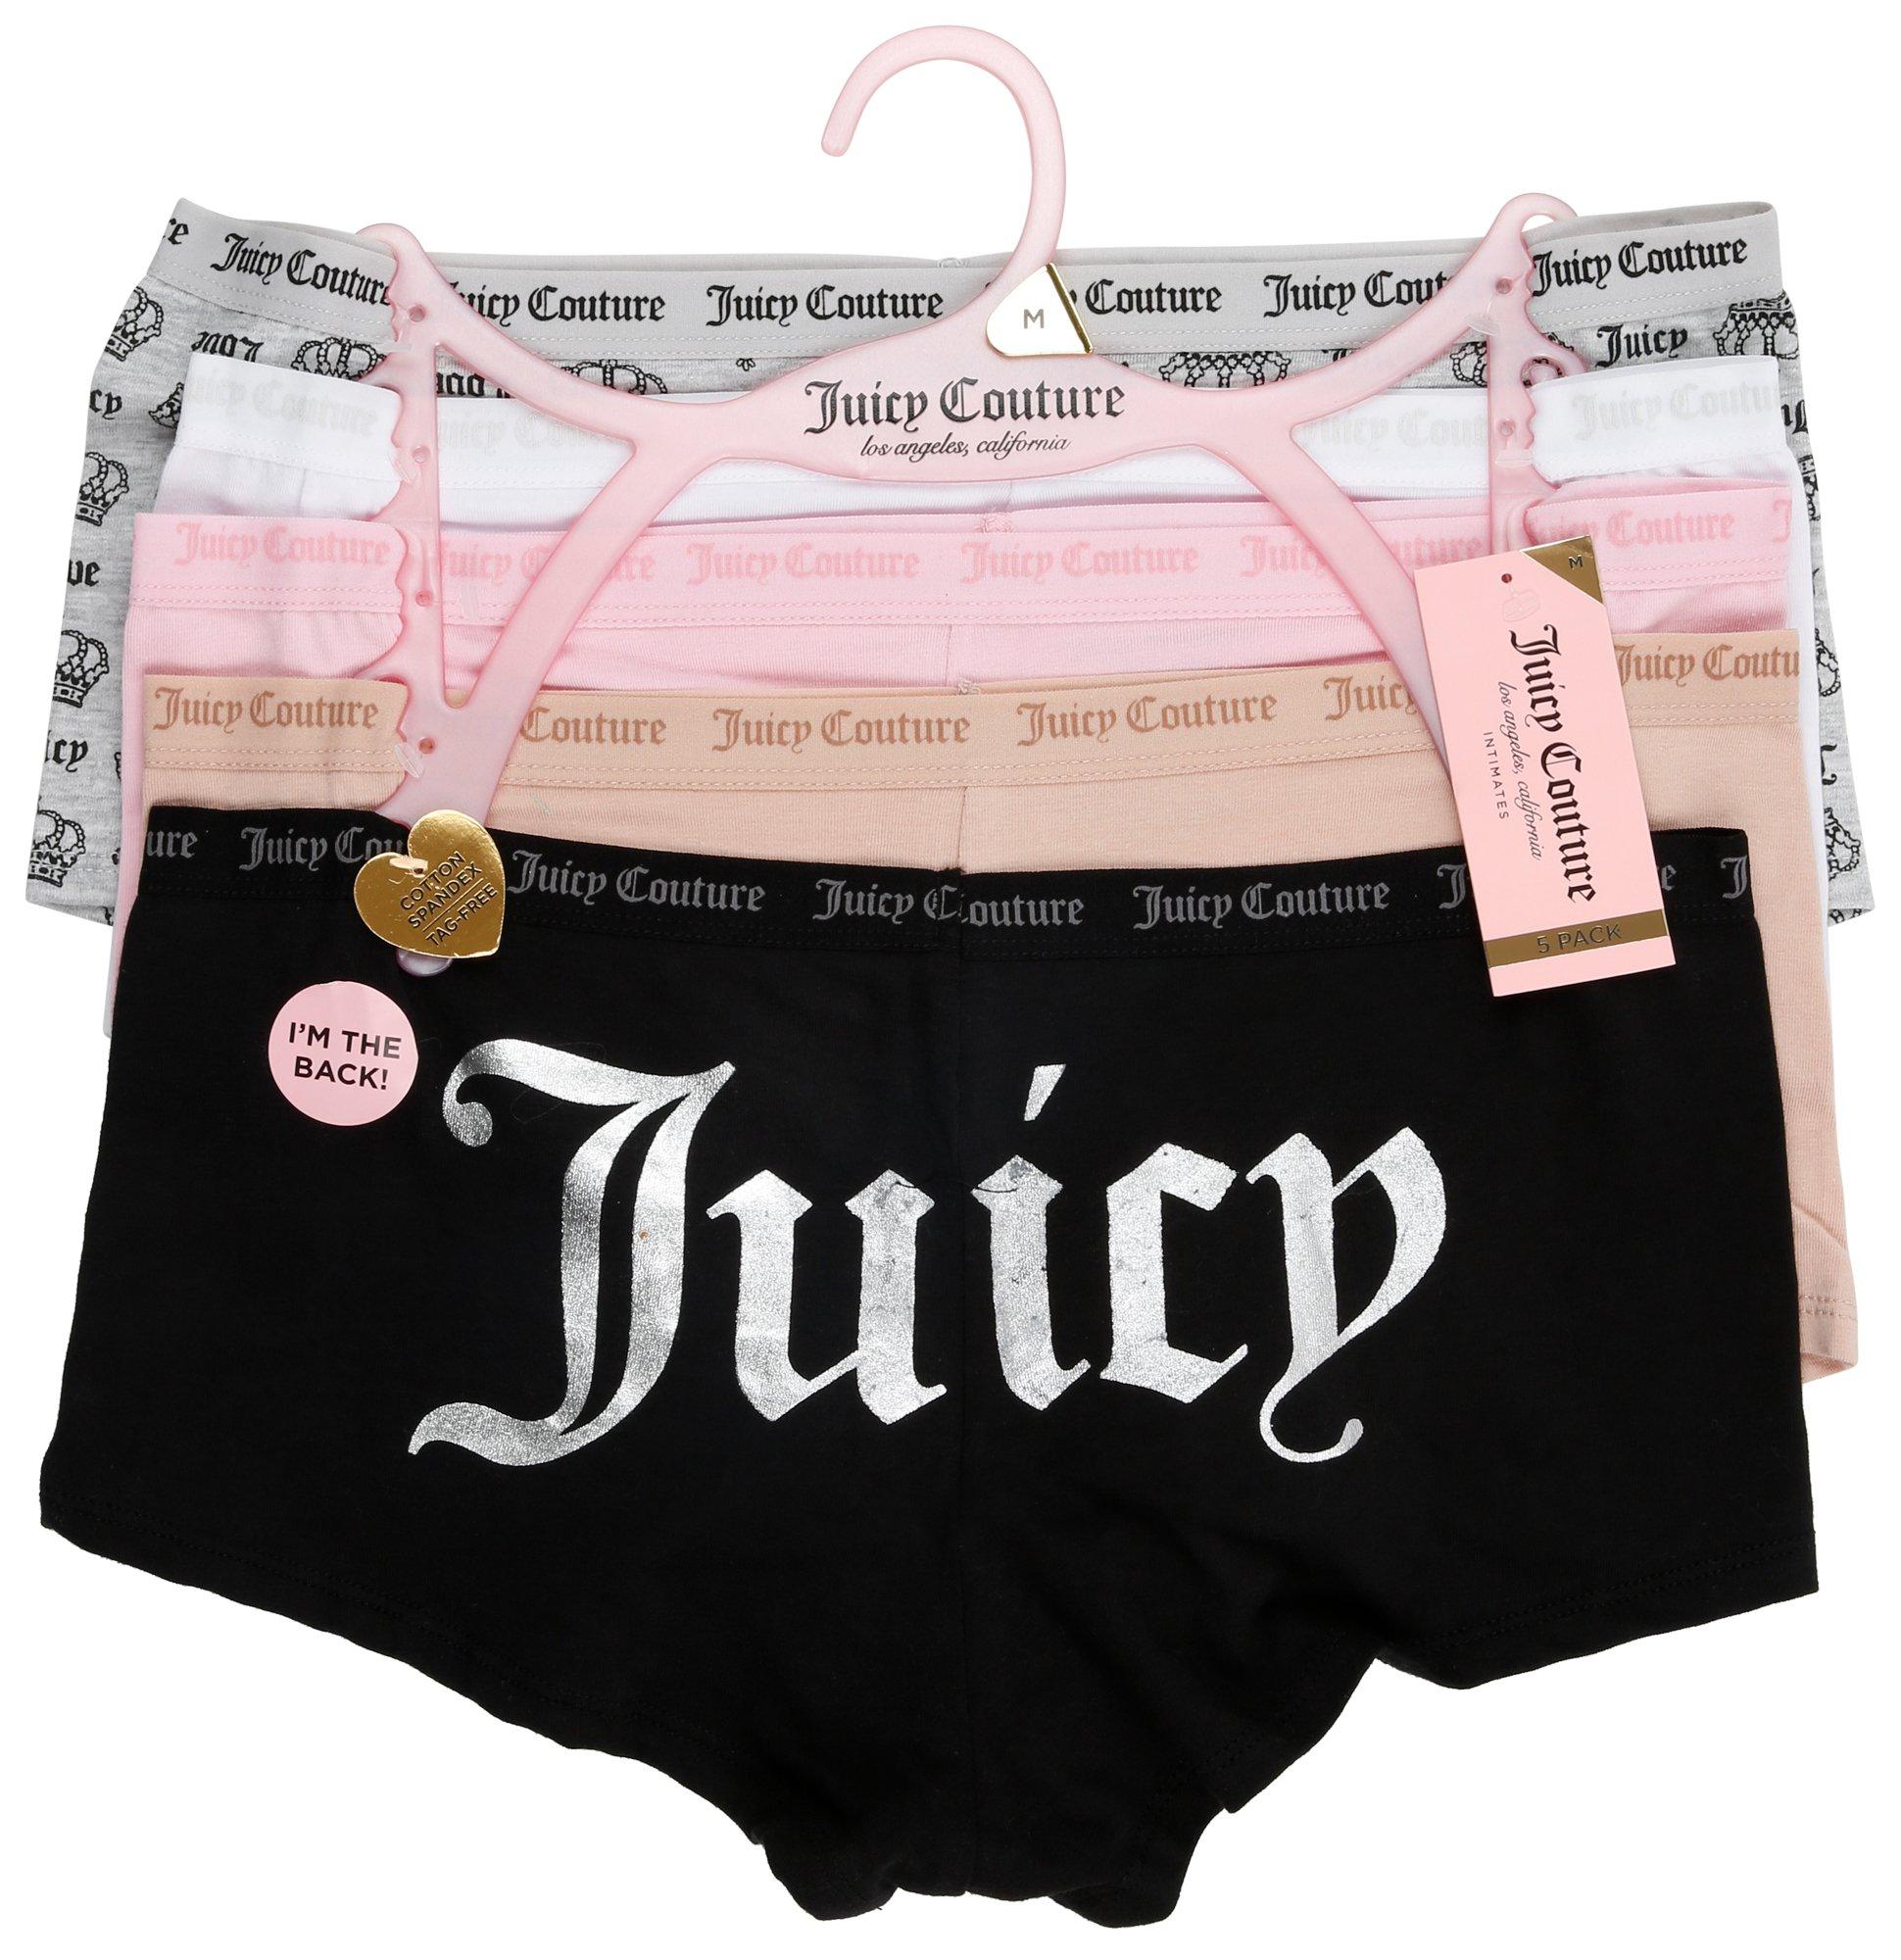 Juicy Couture, Intimates & Sleepwear, Juicy Couture Cheeky Panty